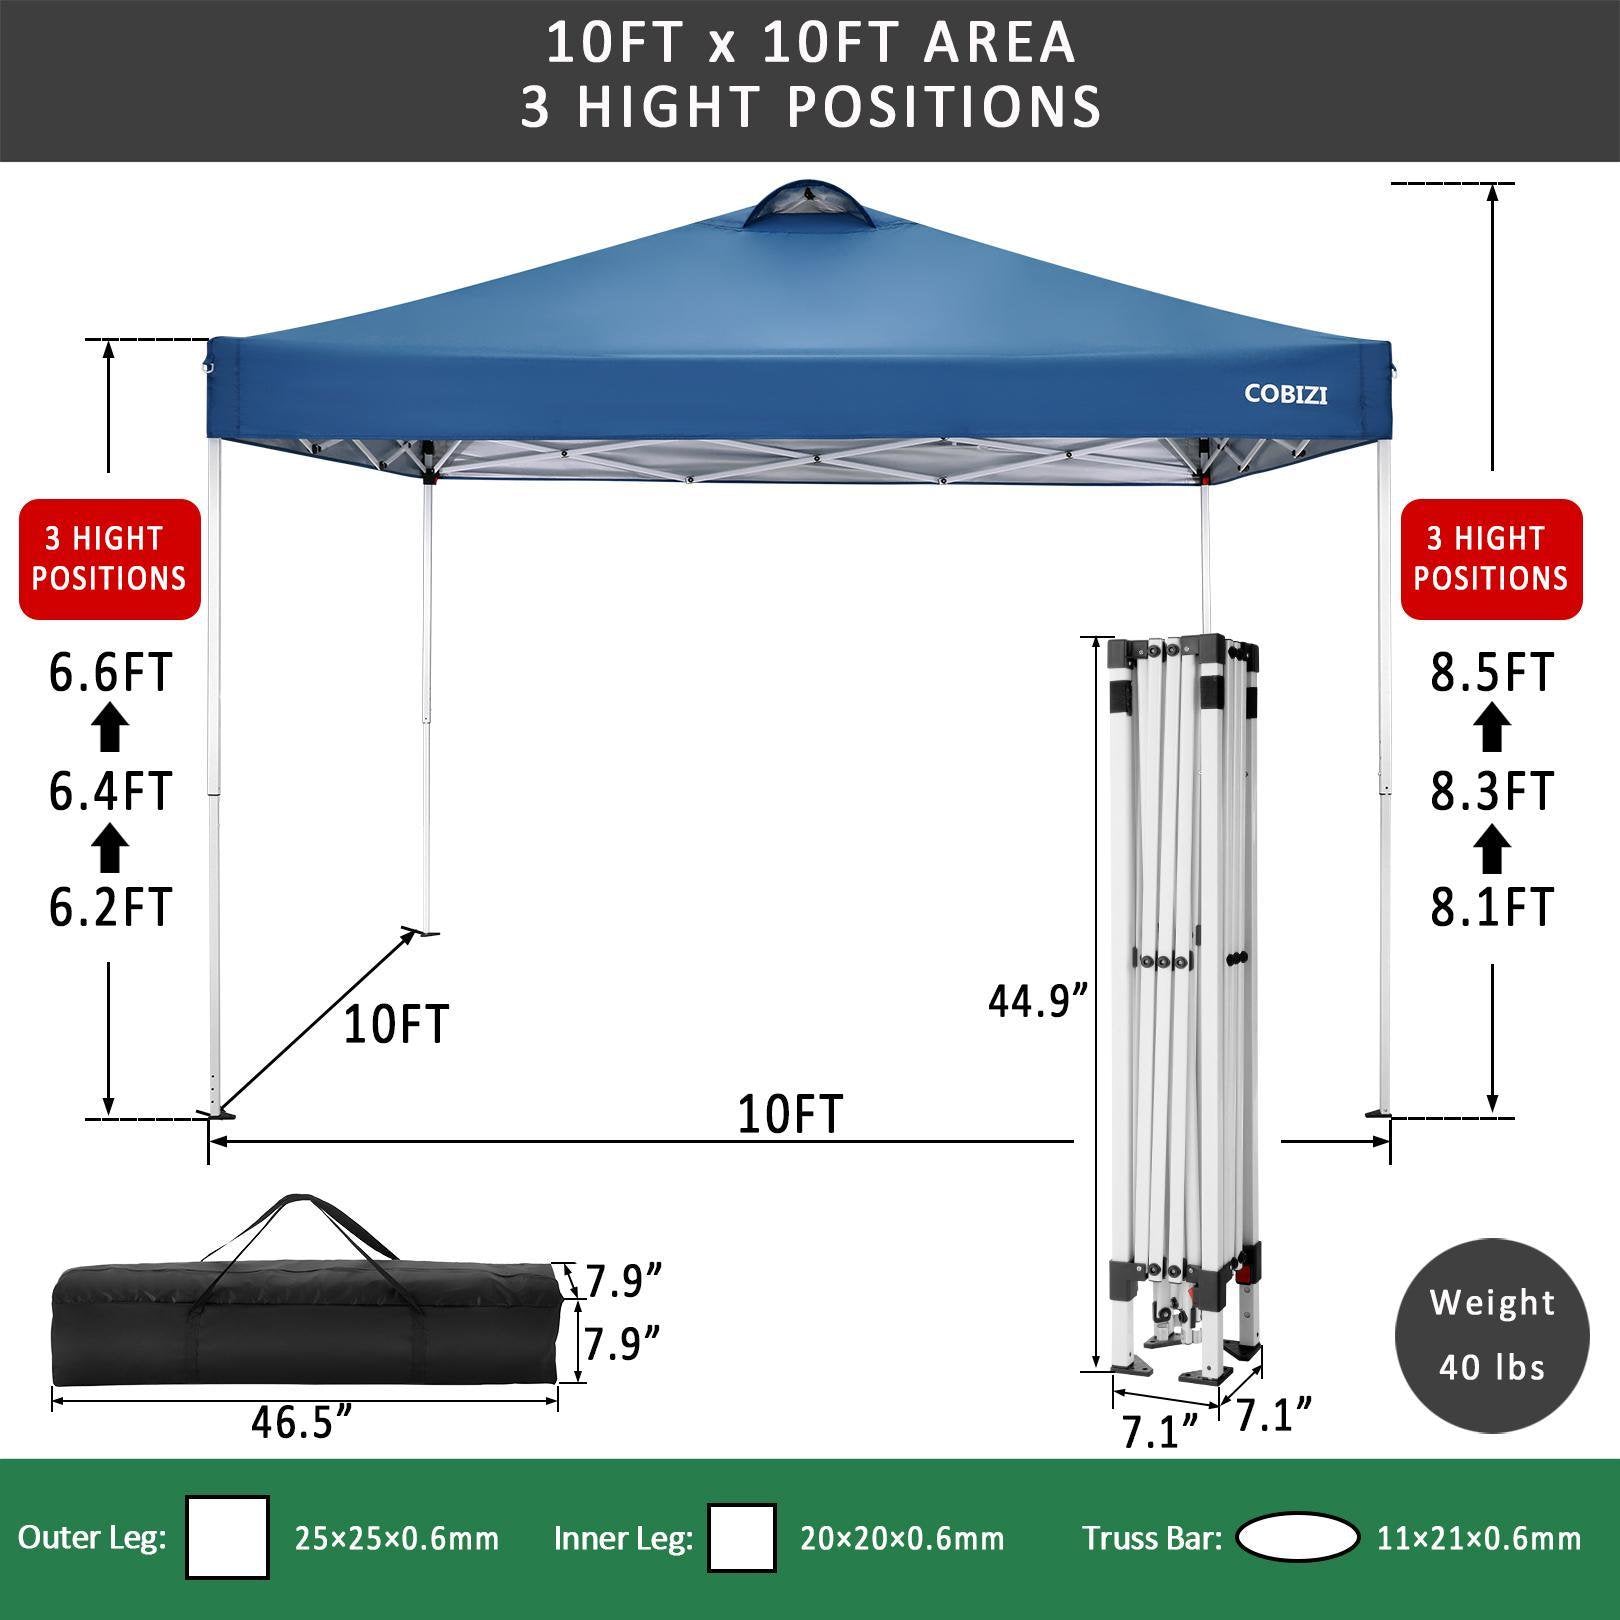 10 x 10ft Pop Up Canopy Tent Instant Outdoor Party Canopy Straight Leg Commercial Gazebo Tent Shelter with 4 Removable Sidewalls & Carrying Bag & 4 Sandbags, Blue